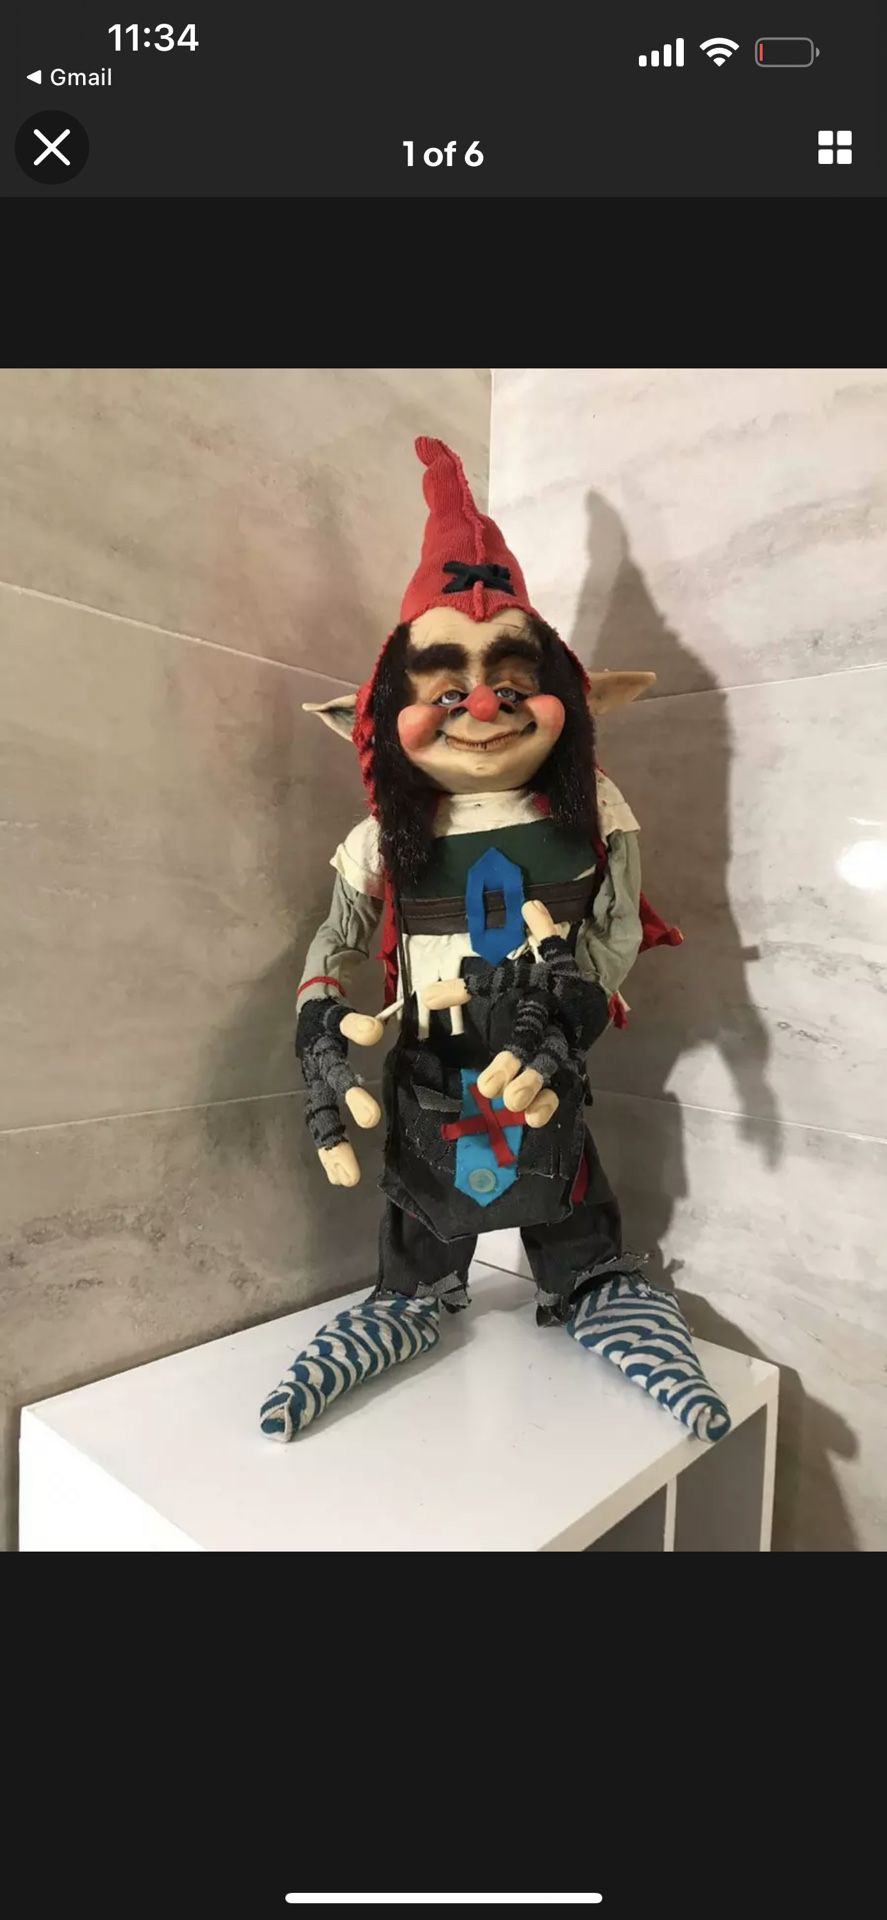 Real Duende For Sale for Sale in San Antonio, TX - OfferUp